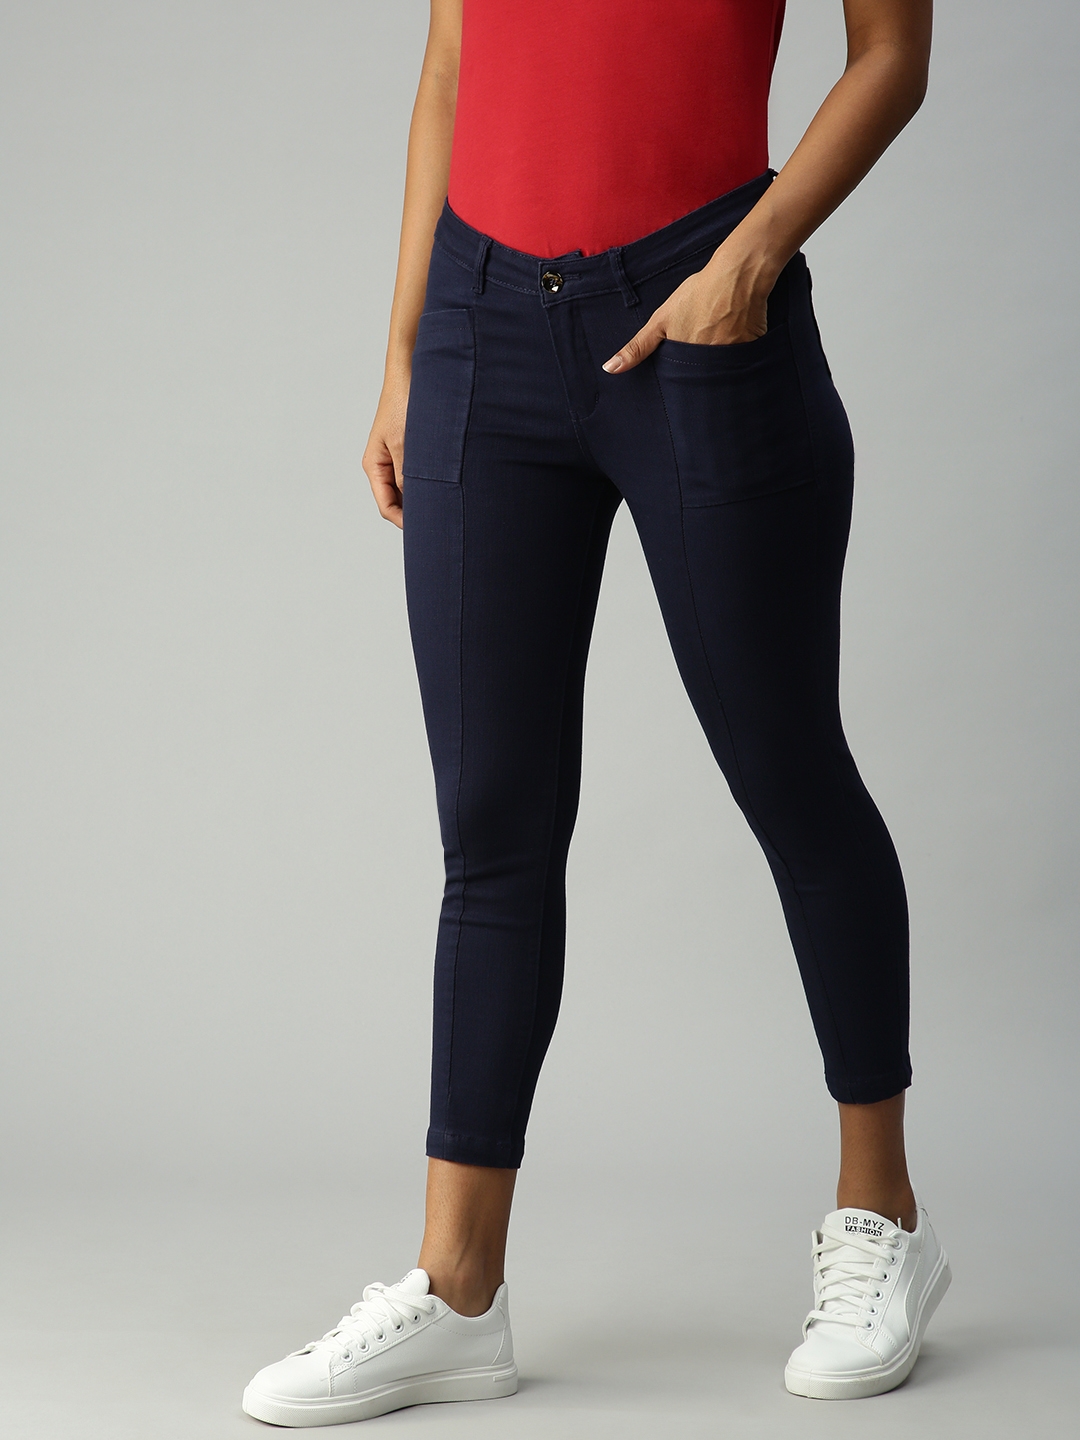 Showoff | SHOWOFF Women's Super Skinny Fit Clean Look Navy Blue Jeans 1